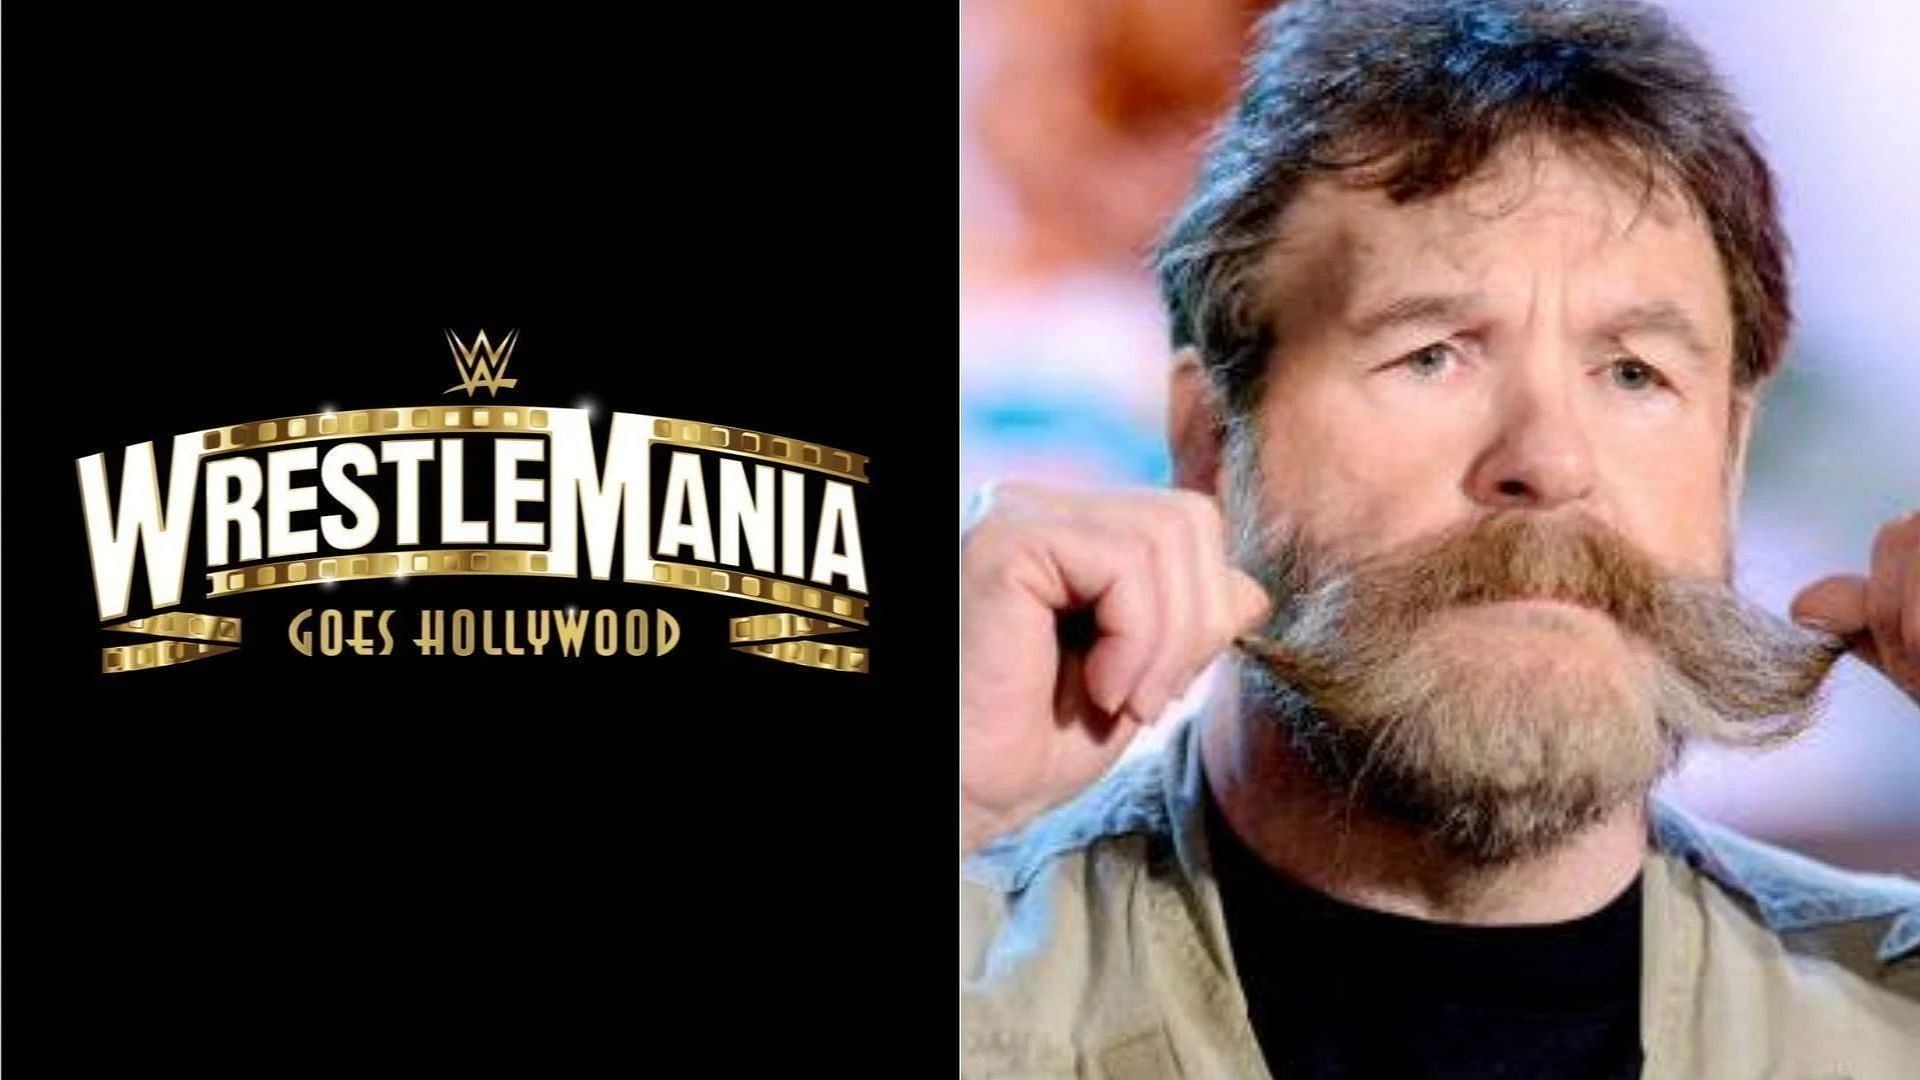 Dutch Mantell was known as Zeb Colter in WWE